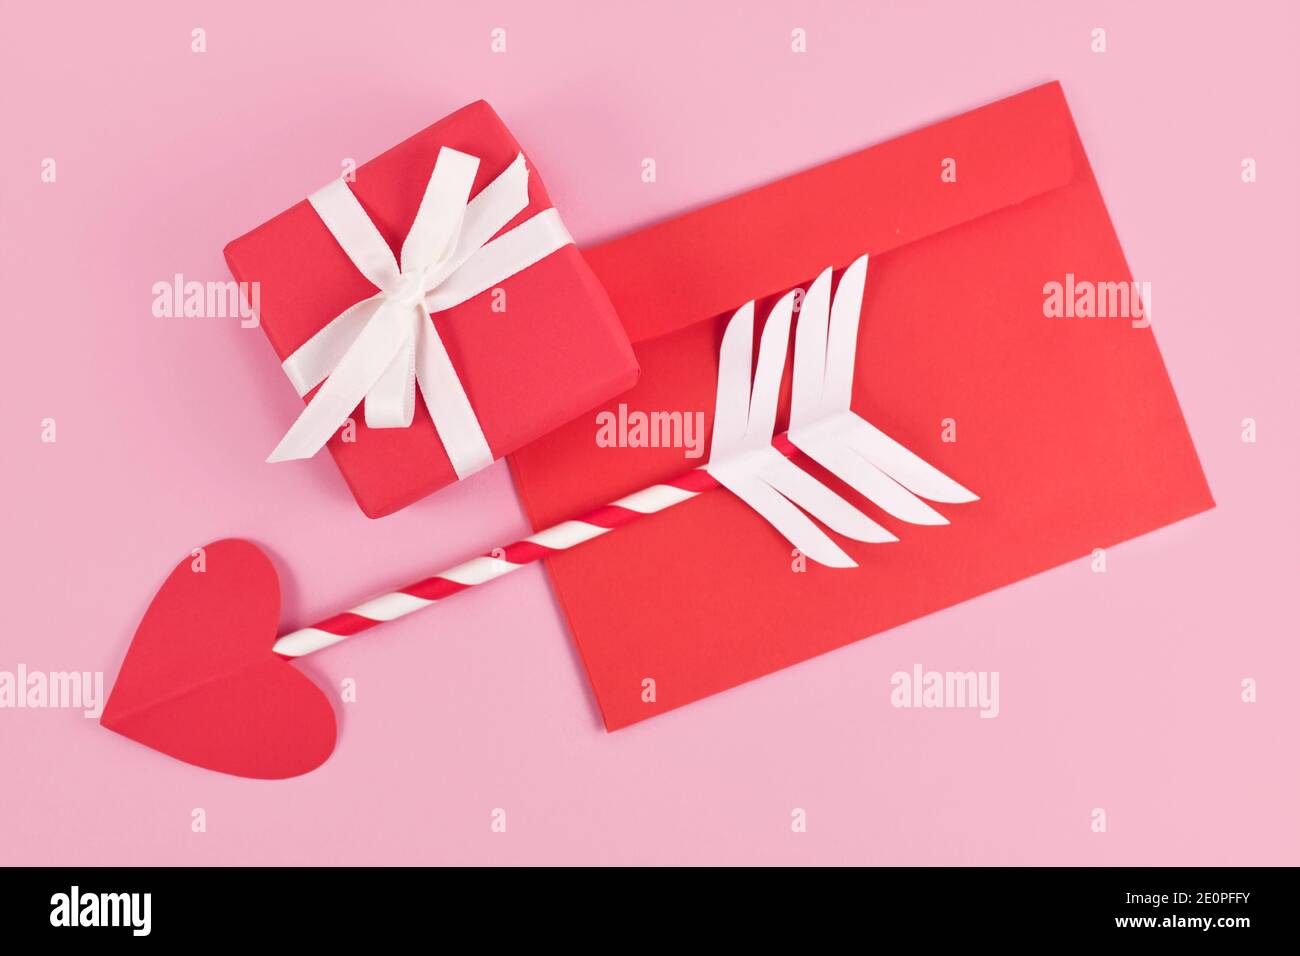 Cute paper cupid love arrow with heart shaped tip, love letter and gift box for Valentine's Day on pink background Stock Photo